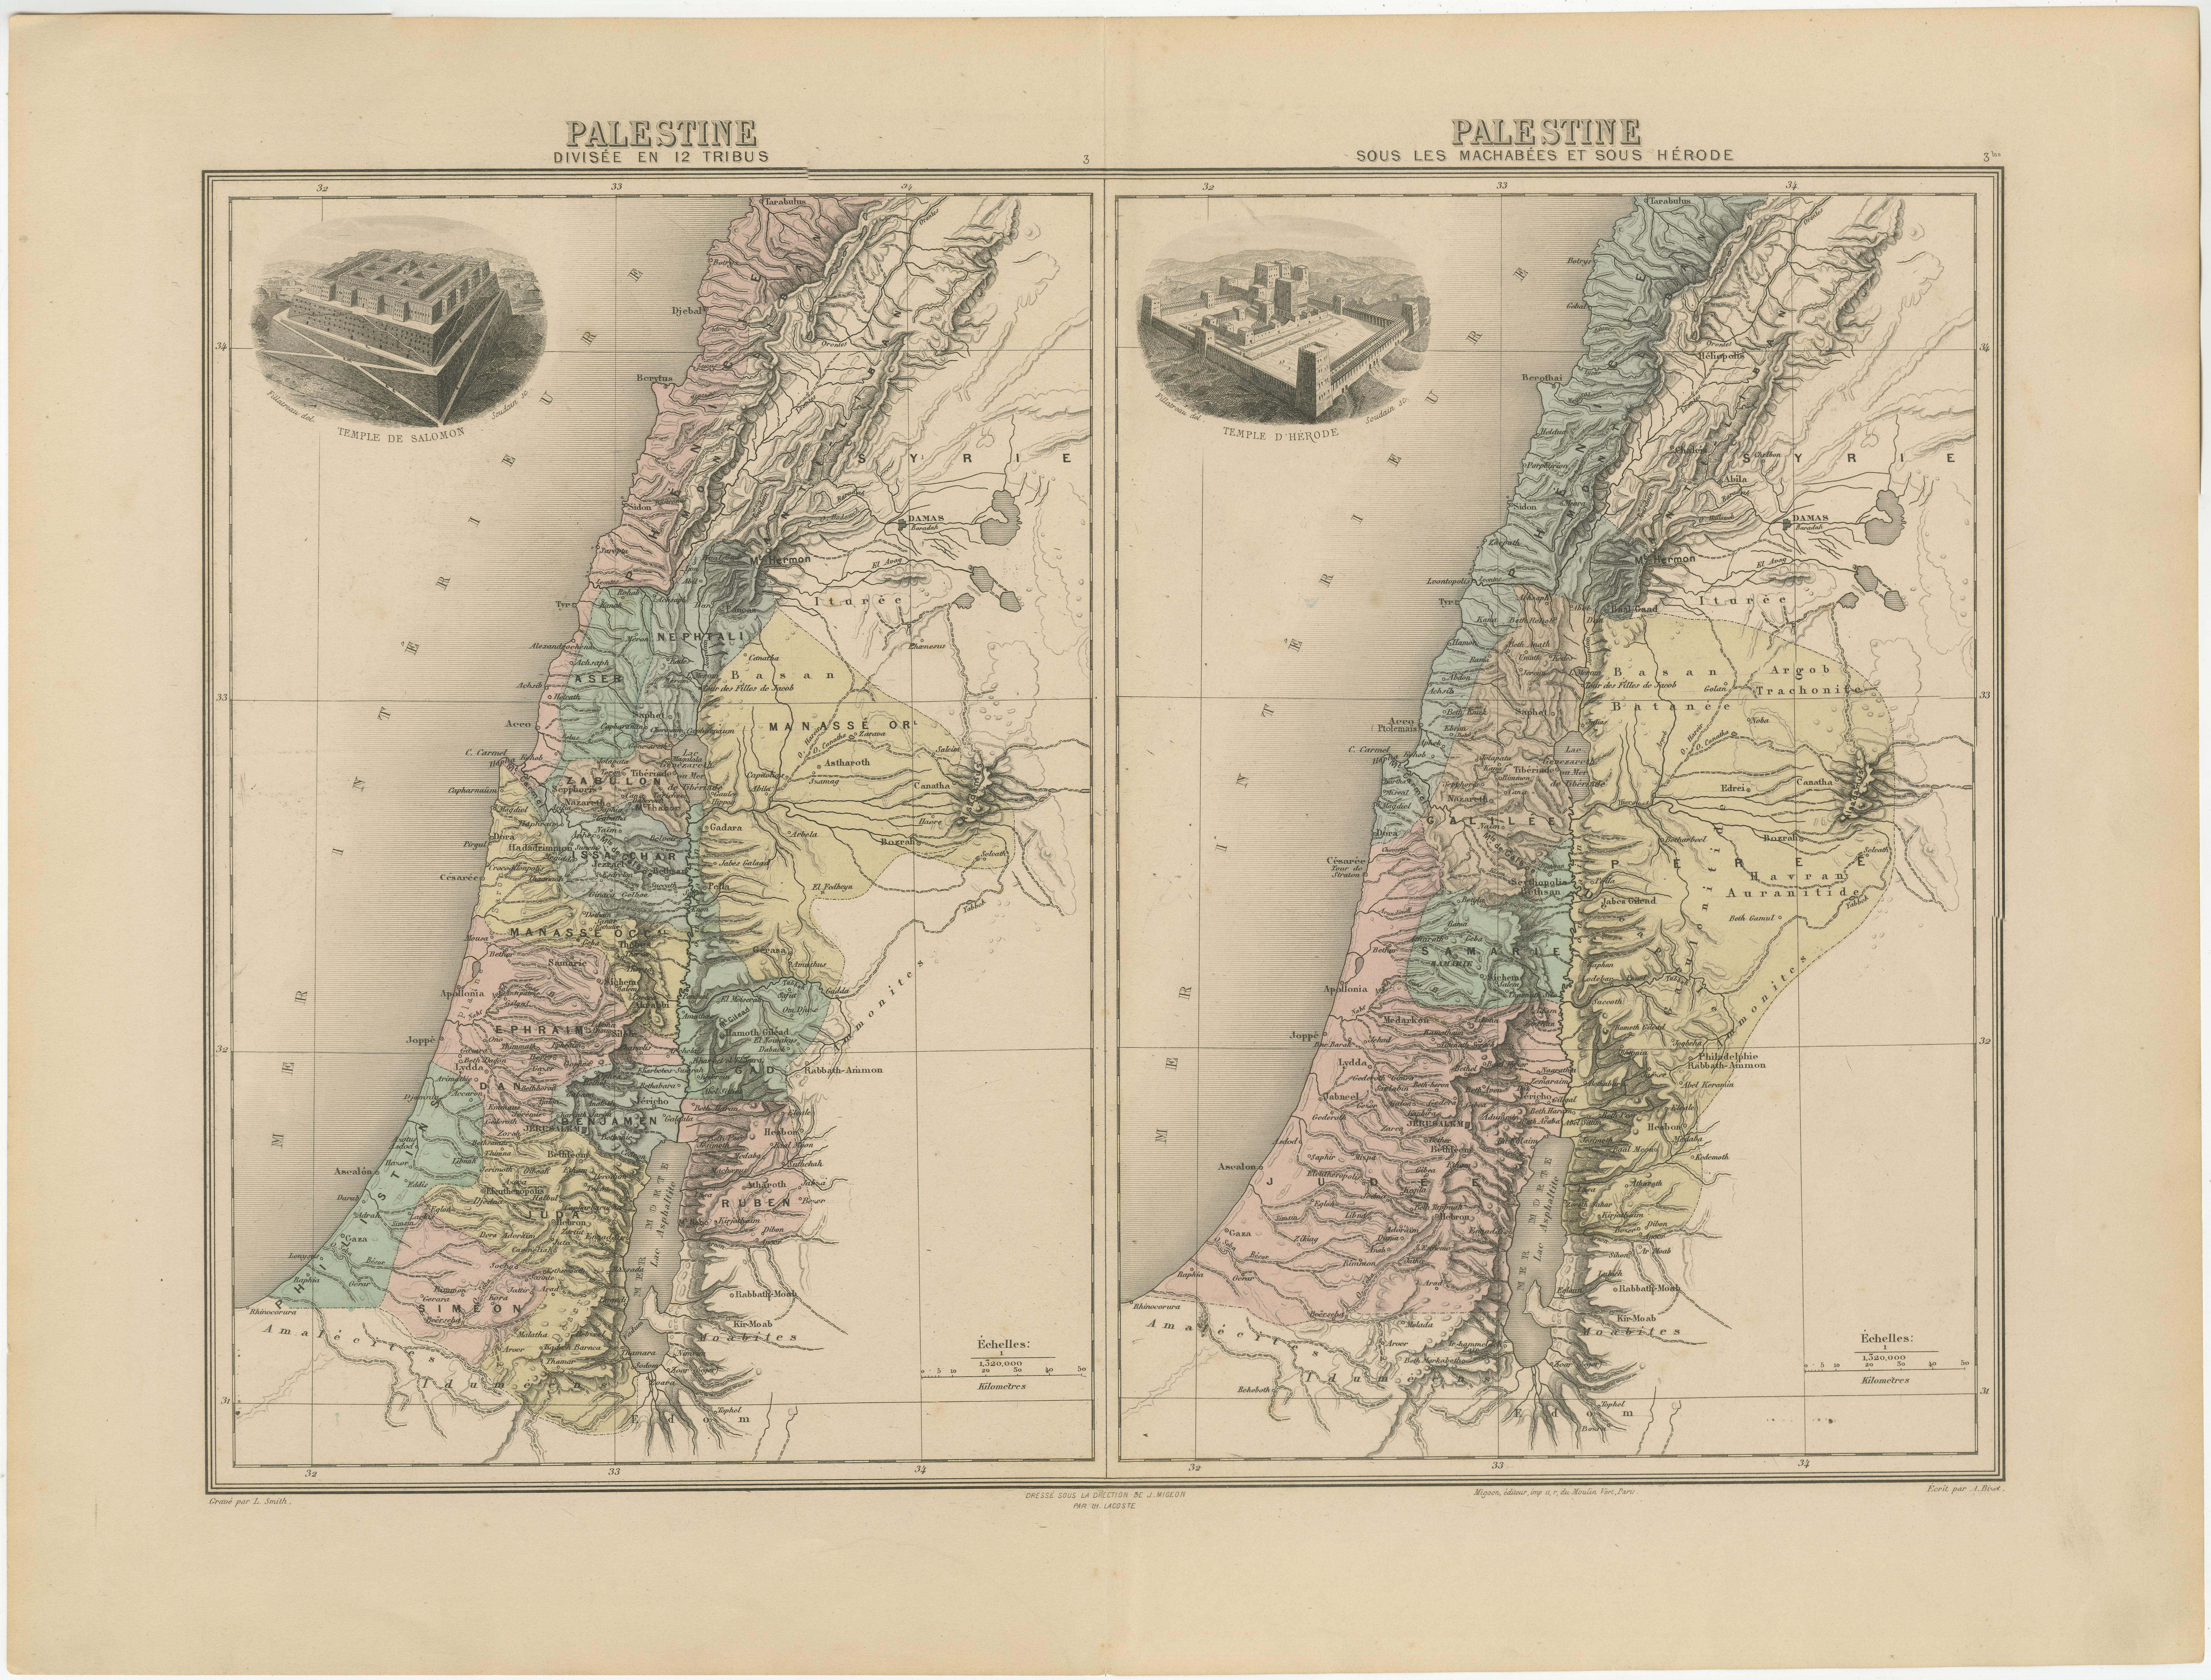 Two maps on one sheet titled 'Palestine divisée en 12 Tribus' and 'Palestine sous les Machabées et sous Hérode'. Maps of Palestine, with vignettes of temples of Solomon and Herodotus. This map originates from 'Nouvel Atlas Illustre Geographie